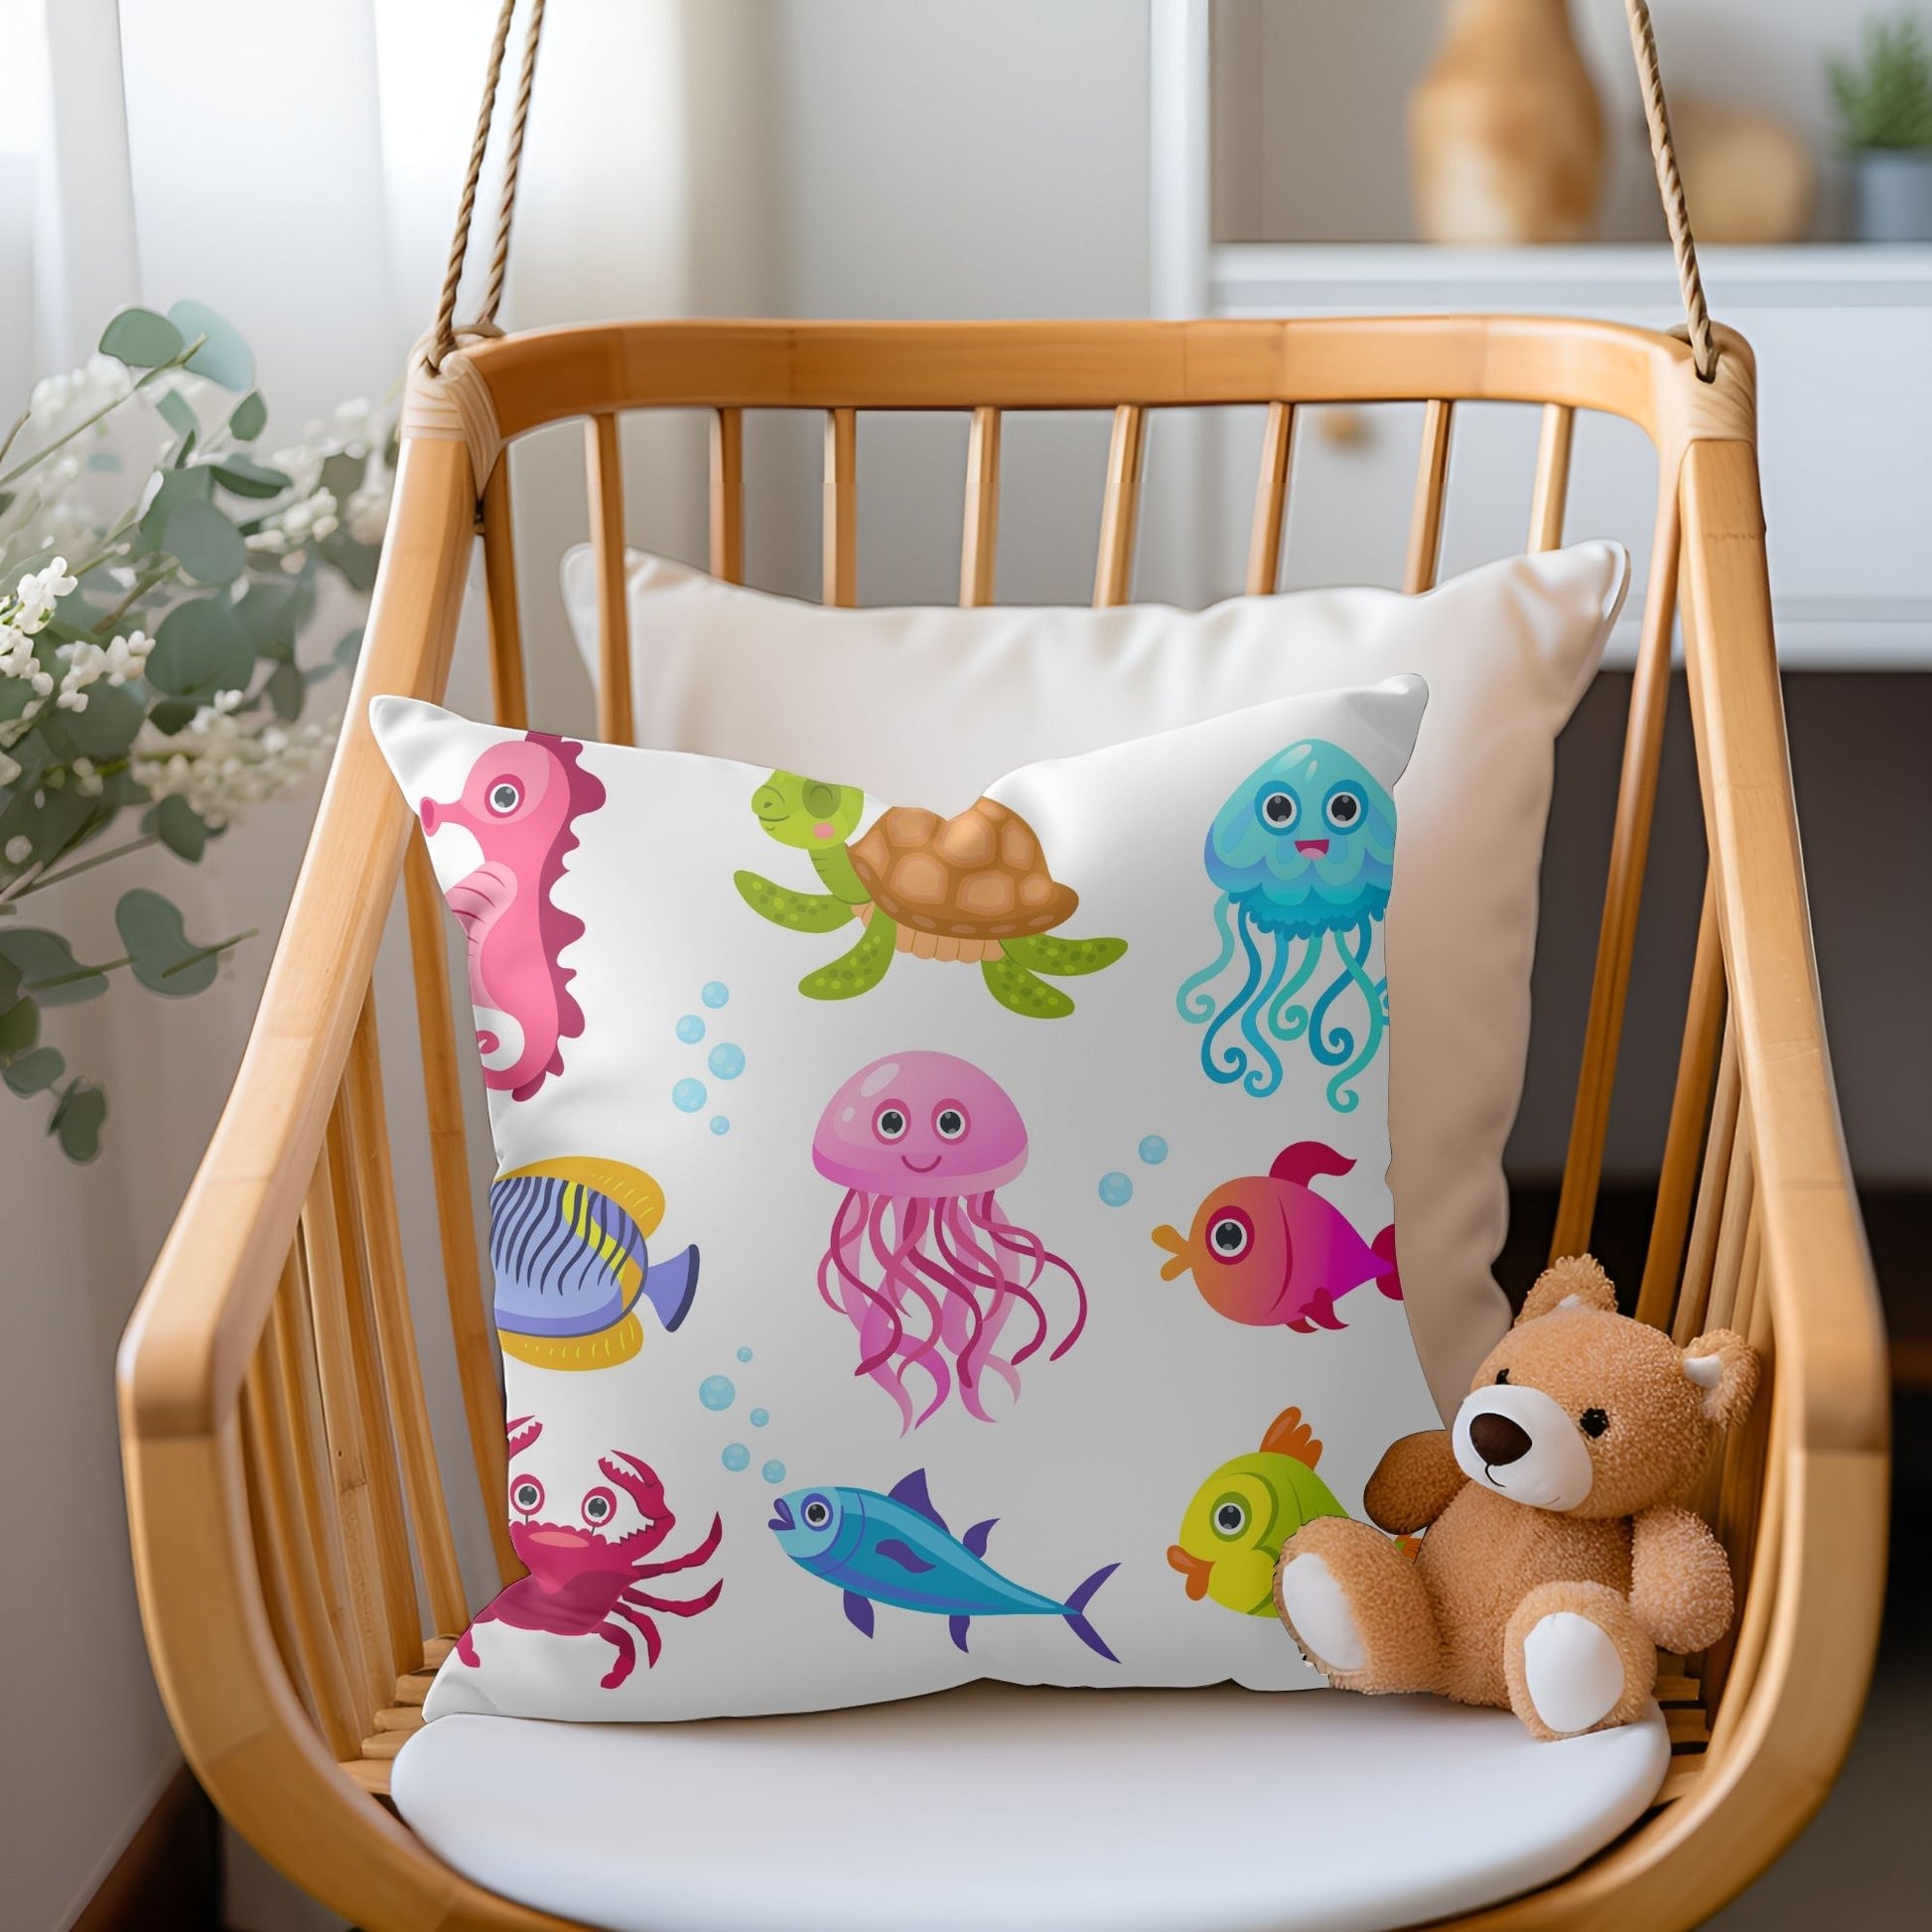 Kids pillow with a playful sea creatures pattern.